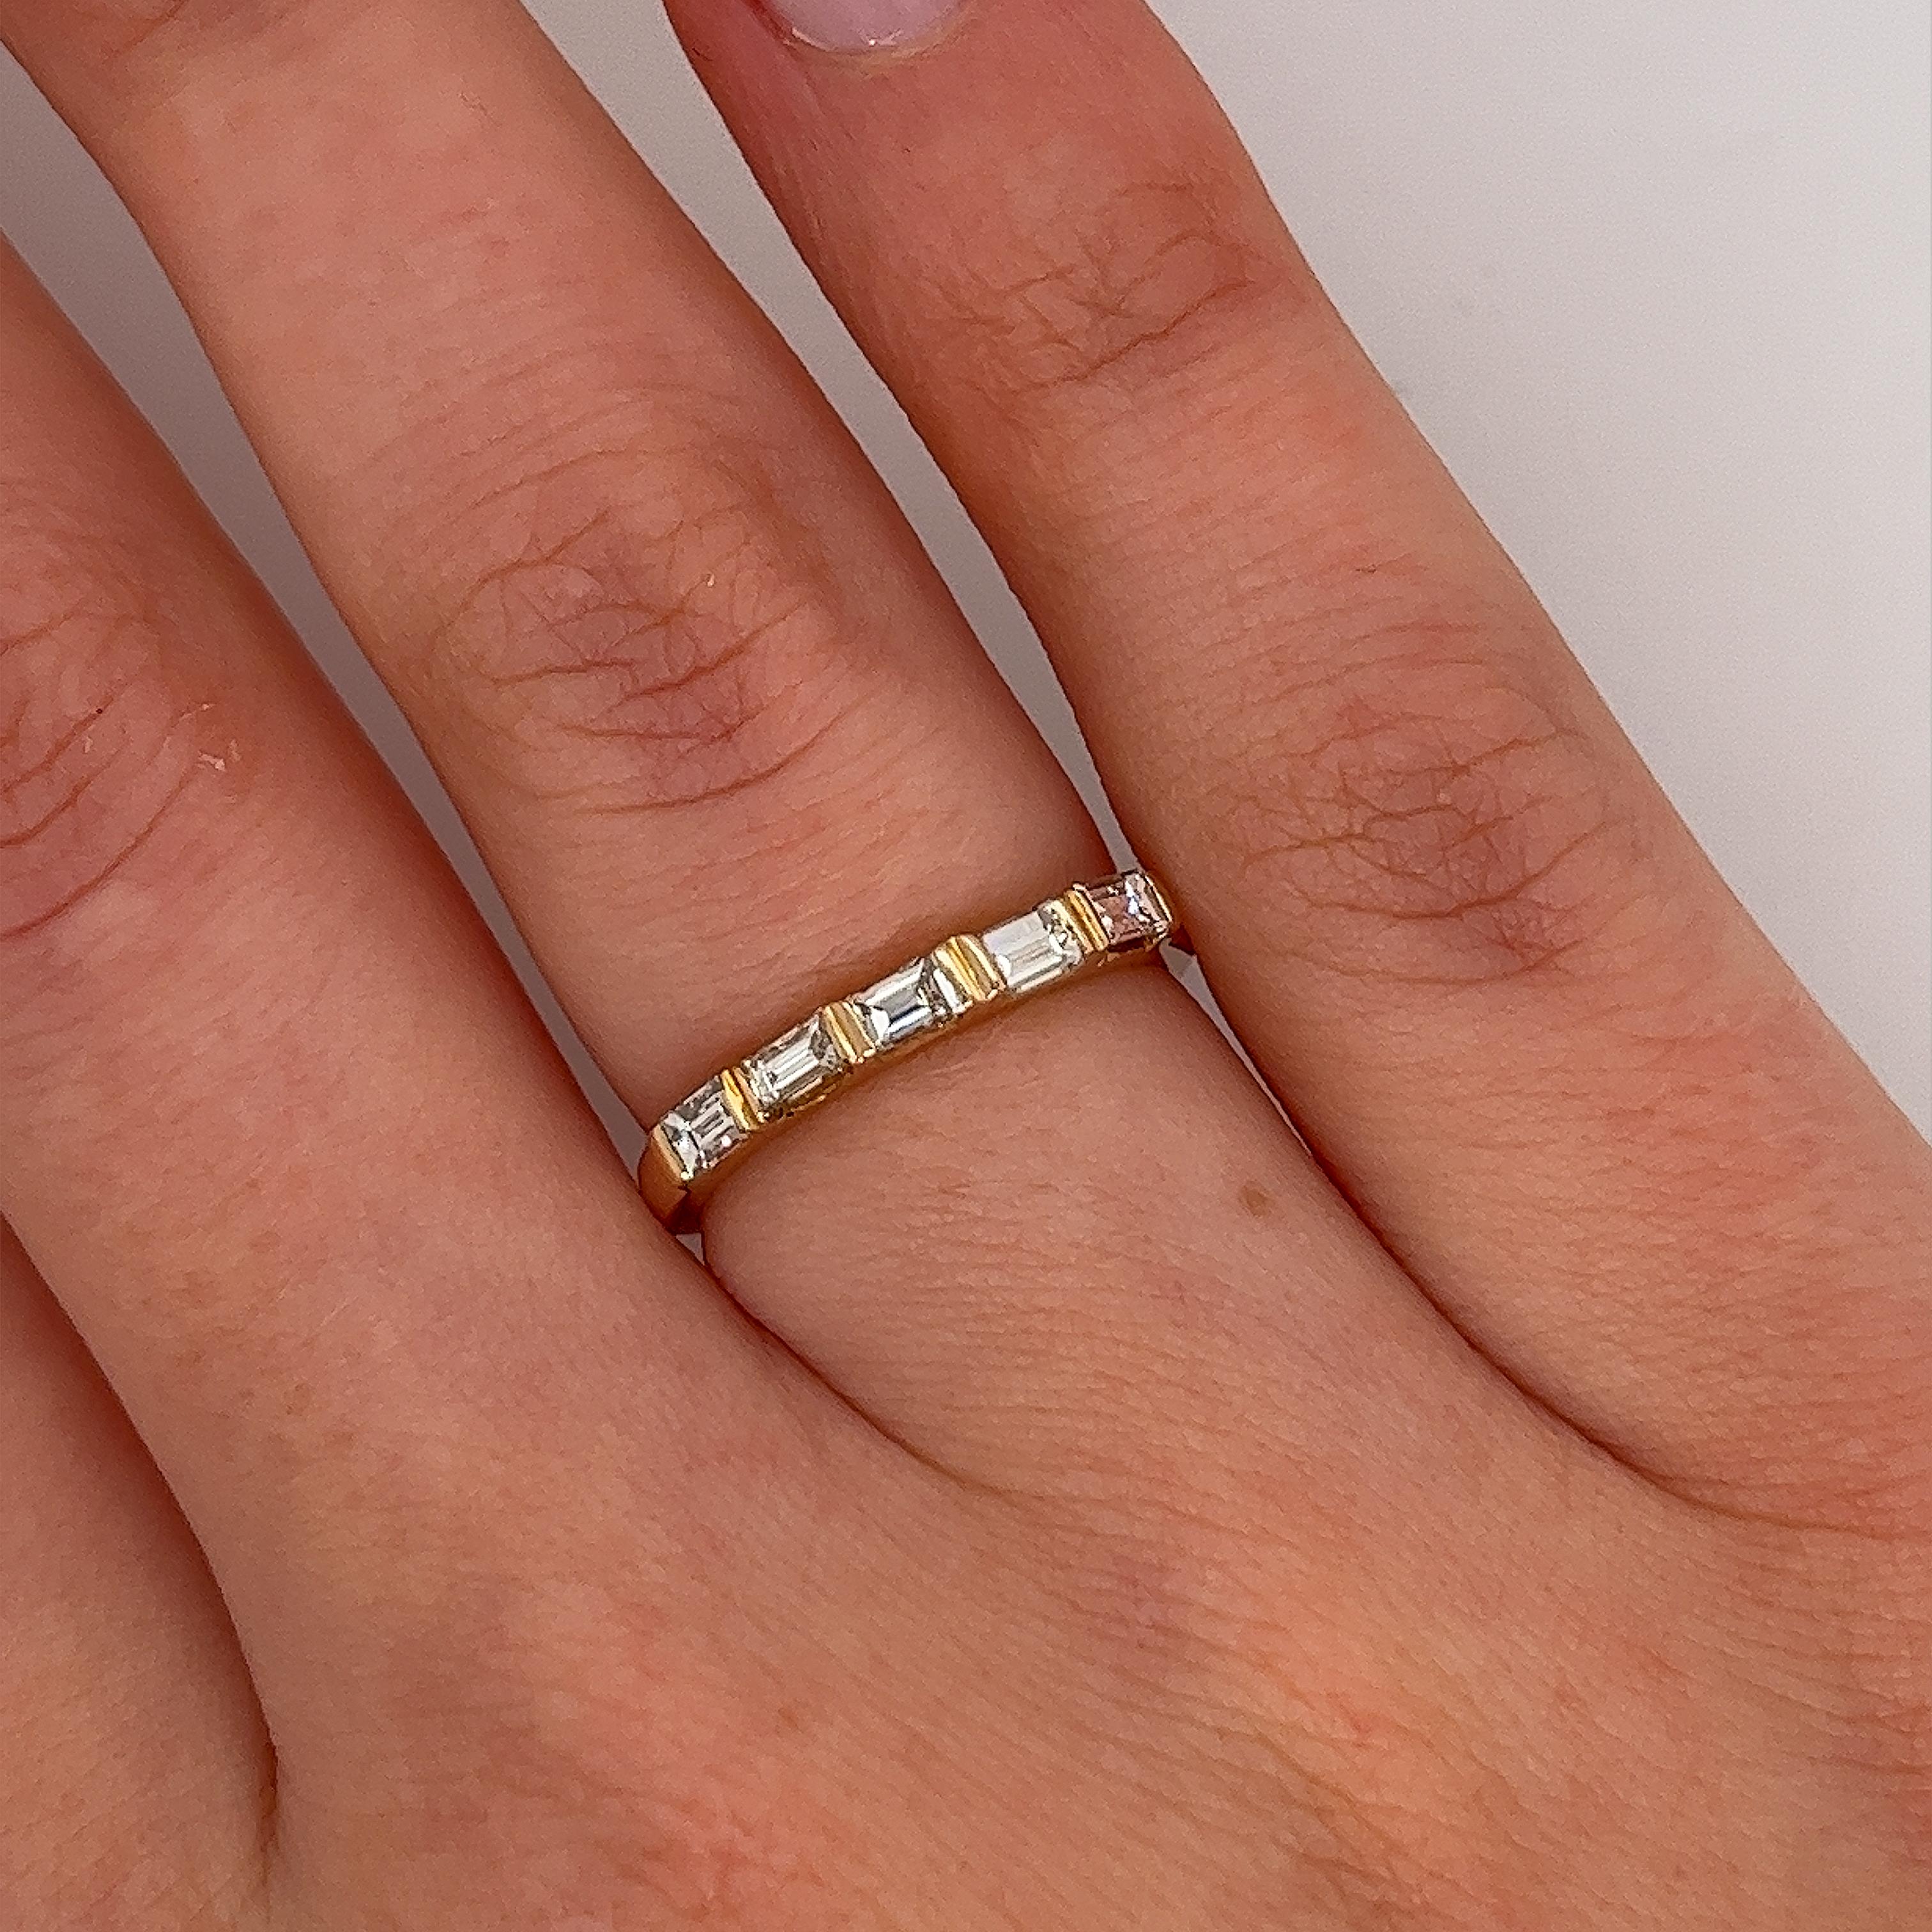 A beautiful diamond half-eternity ring, 
is set with 0.48 carats G/H colour SI1 clarity baguette diamonds.
This stunning symbol of everlasting love.

Total Diamond Weight: 0.48ct 
Diamond Colour: G/H
Diamond Clarity: SI1
Width of Band: 1.73mm
Length